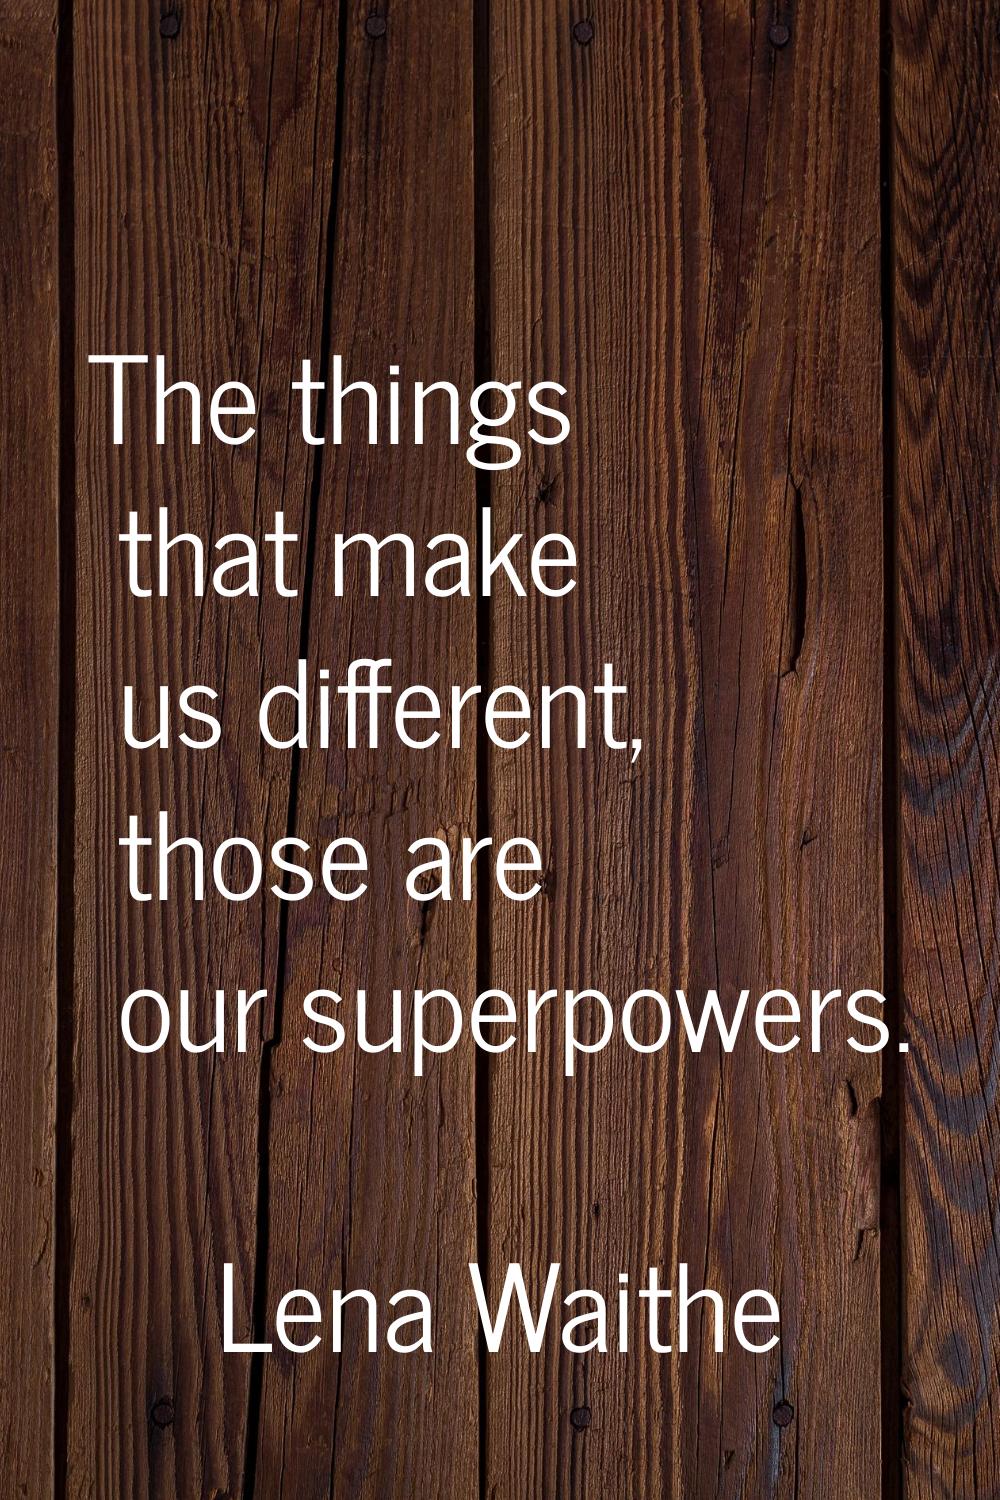 The things that make us different, those are our superpowers.